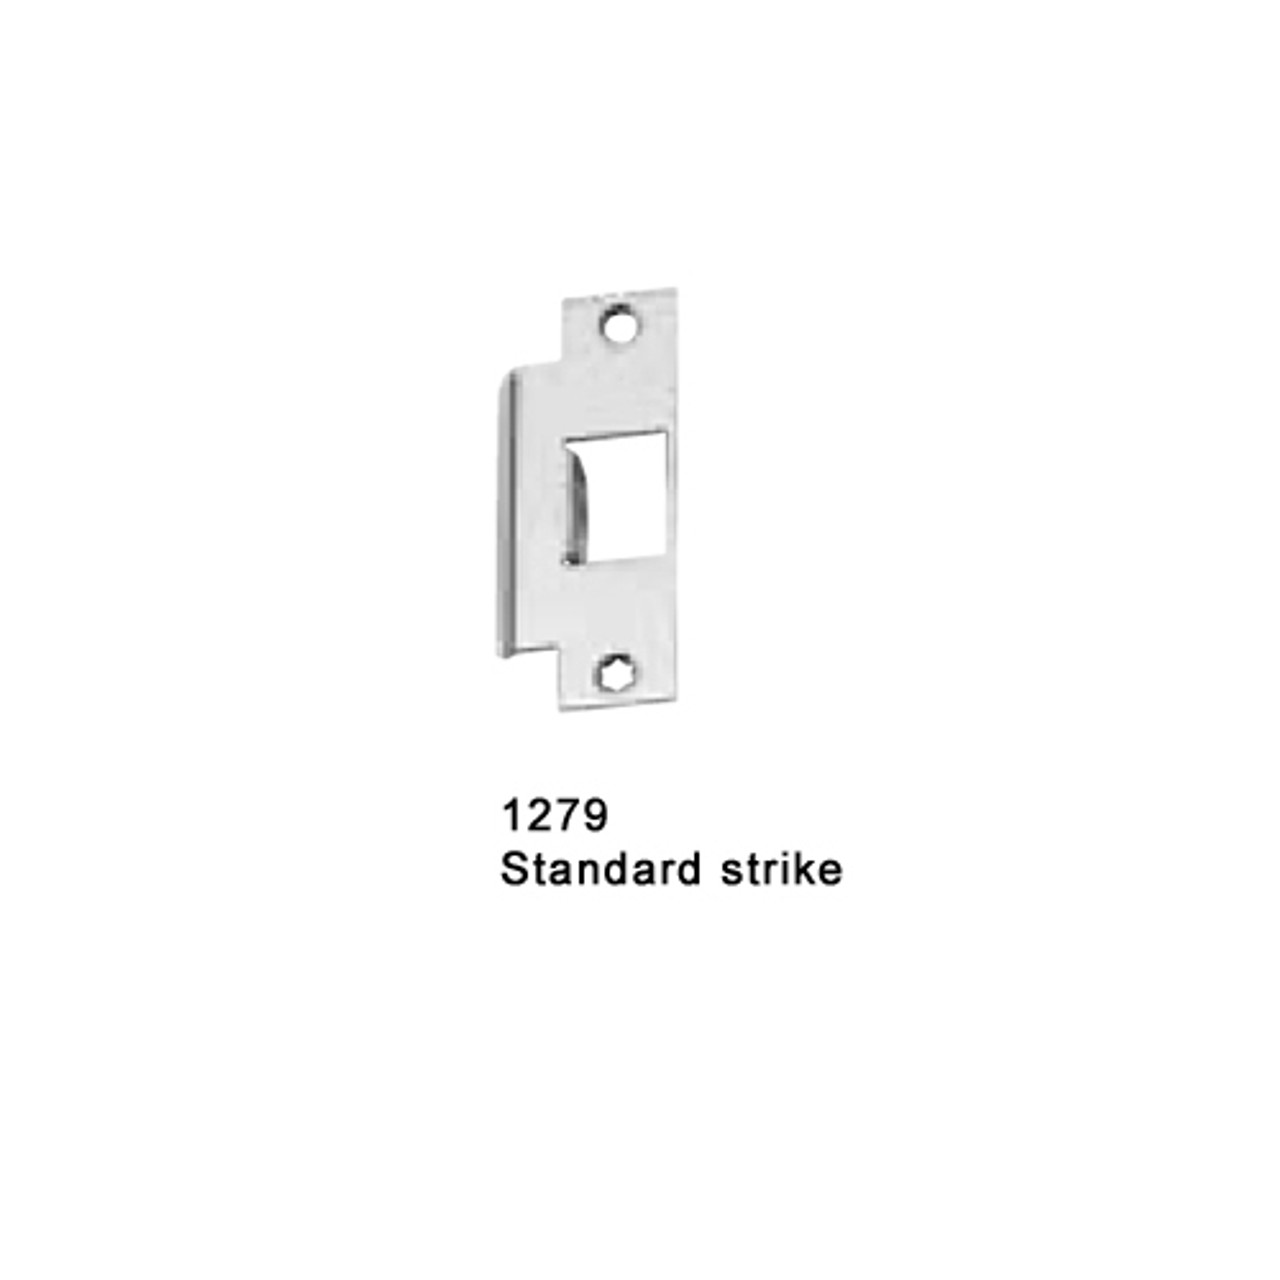 F-25-M-DT-US32-3-LHR Falcon 25 Series Fire Rated Mortise Lock Devices with 512DT Dummy Trim in Polished Stainless Steel